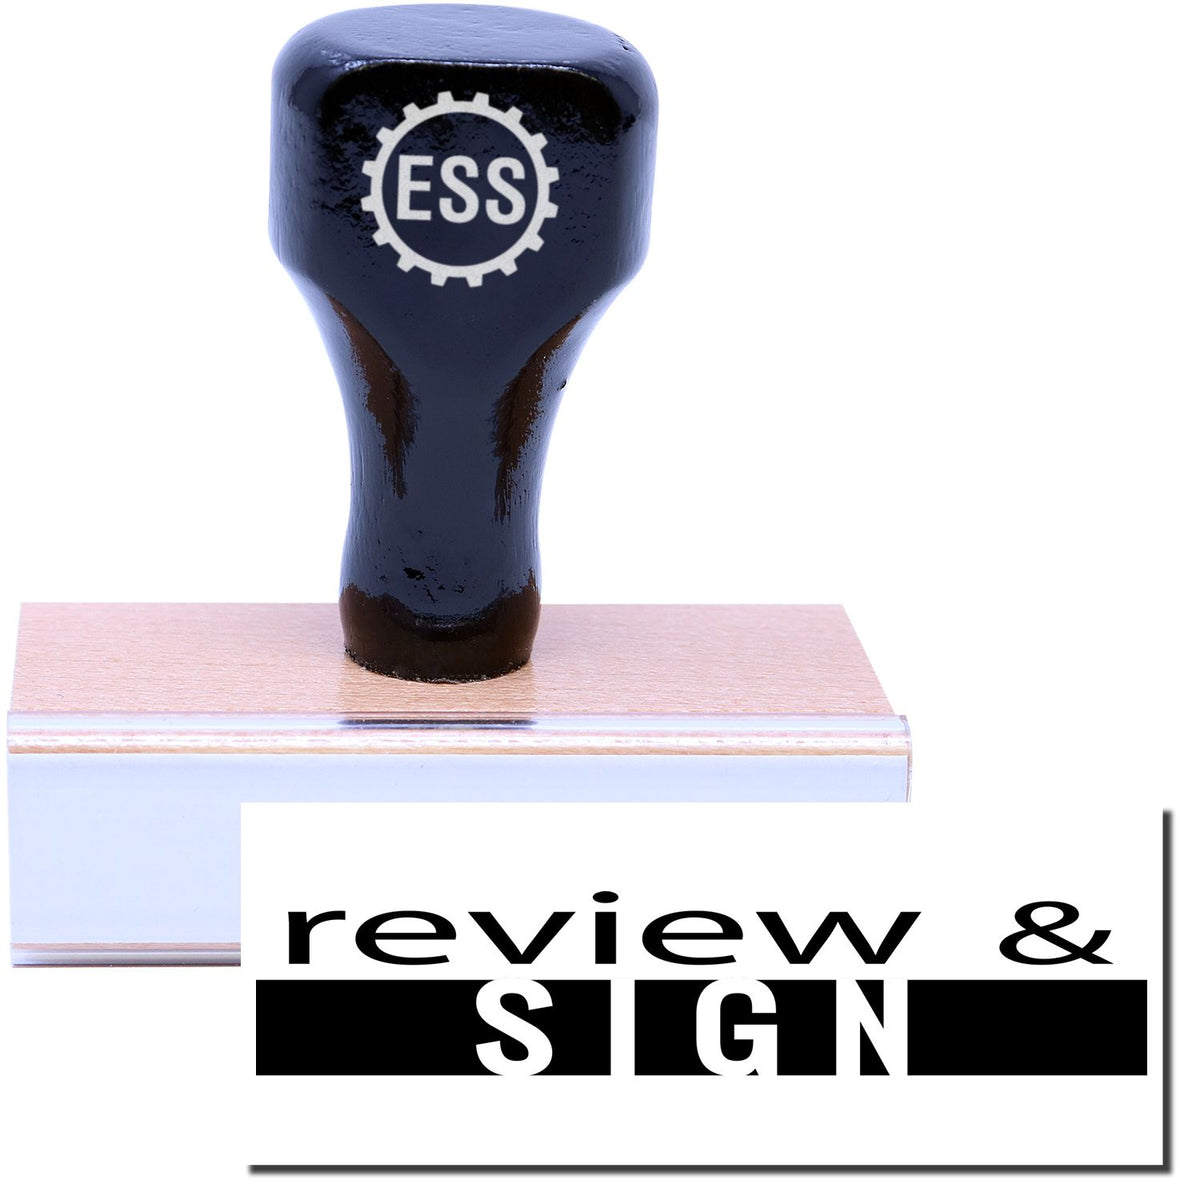 A stock office rubber stamp with a stamped image showing how the text &quot;review &amp; SIGN&quot; in a large font and a dual-colored marking is displayed after stamping.